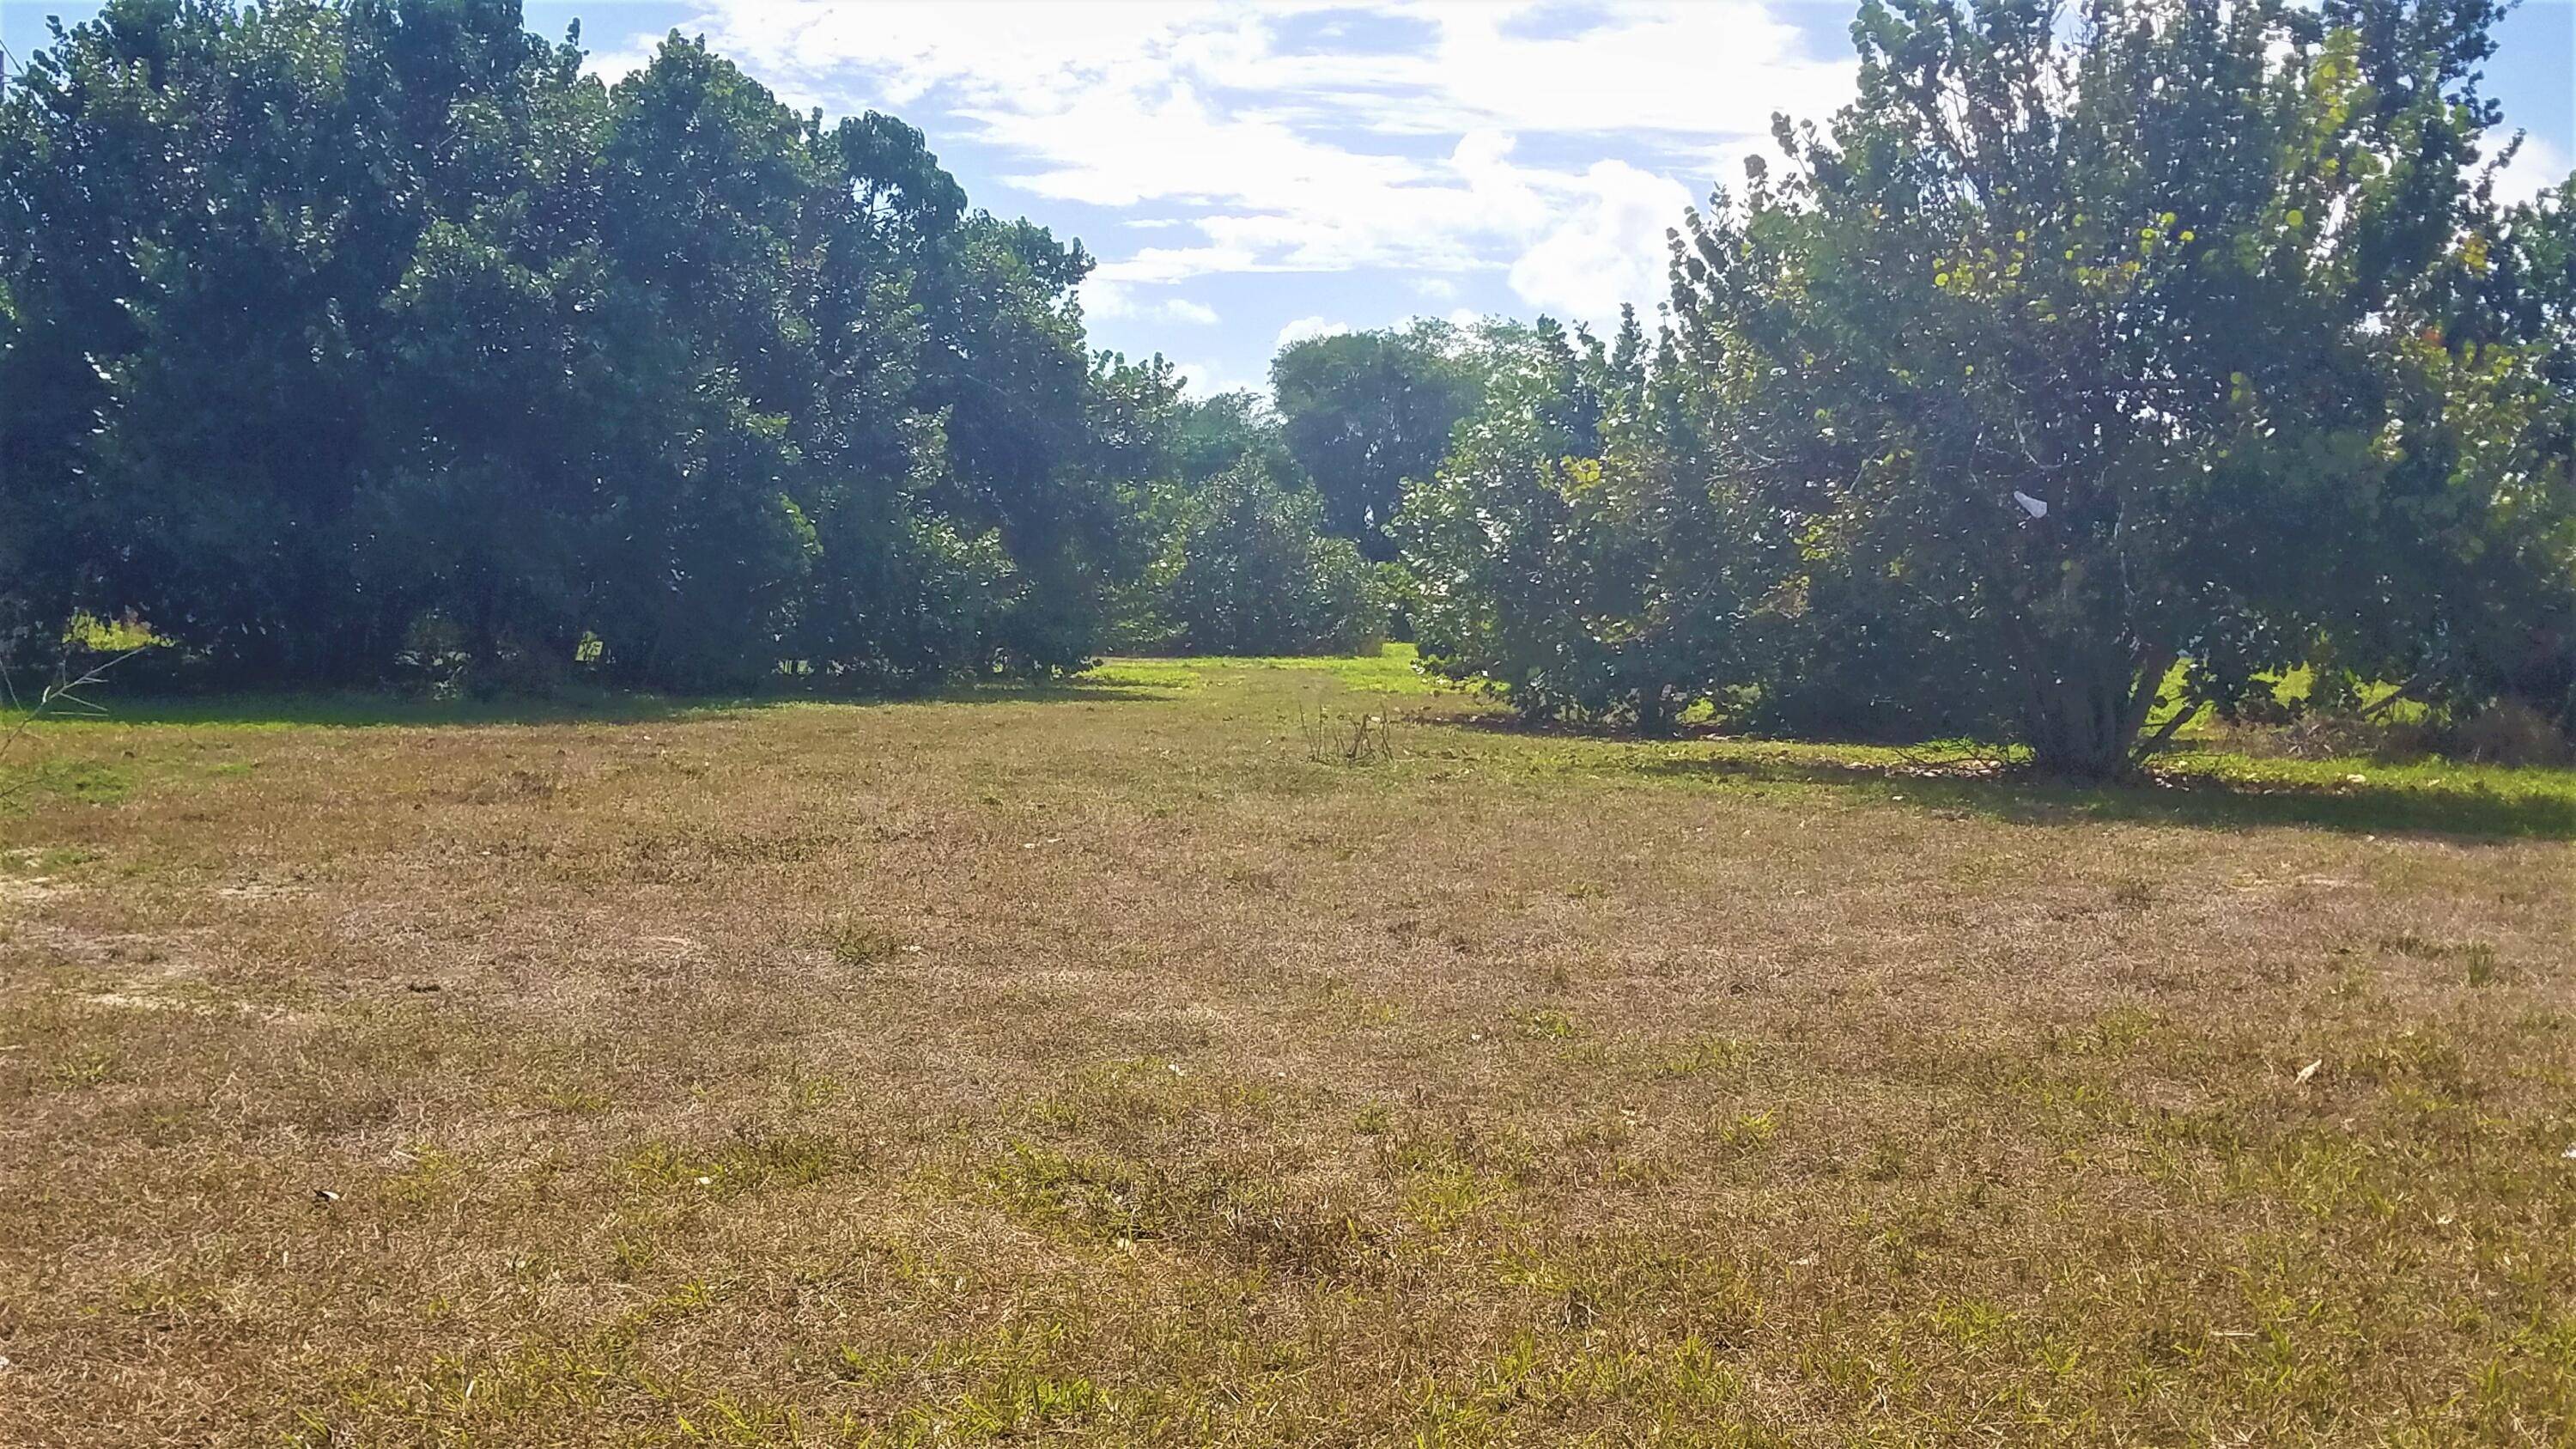 2. 53 Acres directly on Boynton Beach Blvd with 200 feet of frontage between I 95 and Congress Ave.